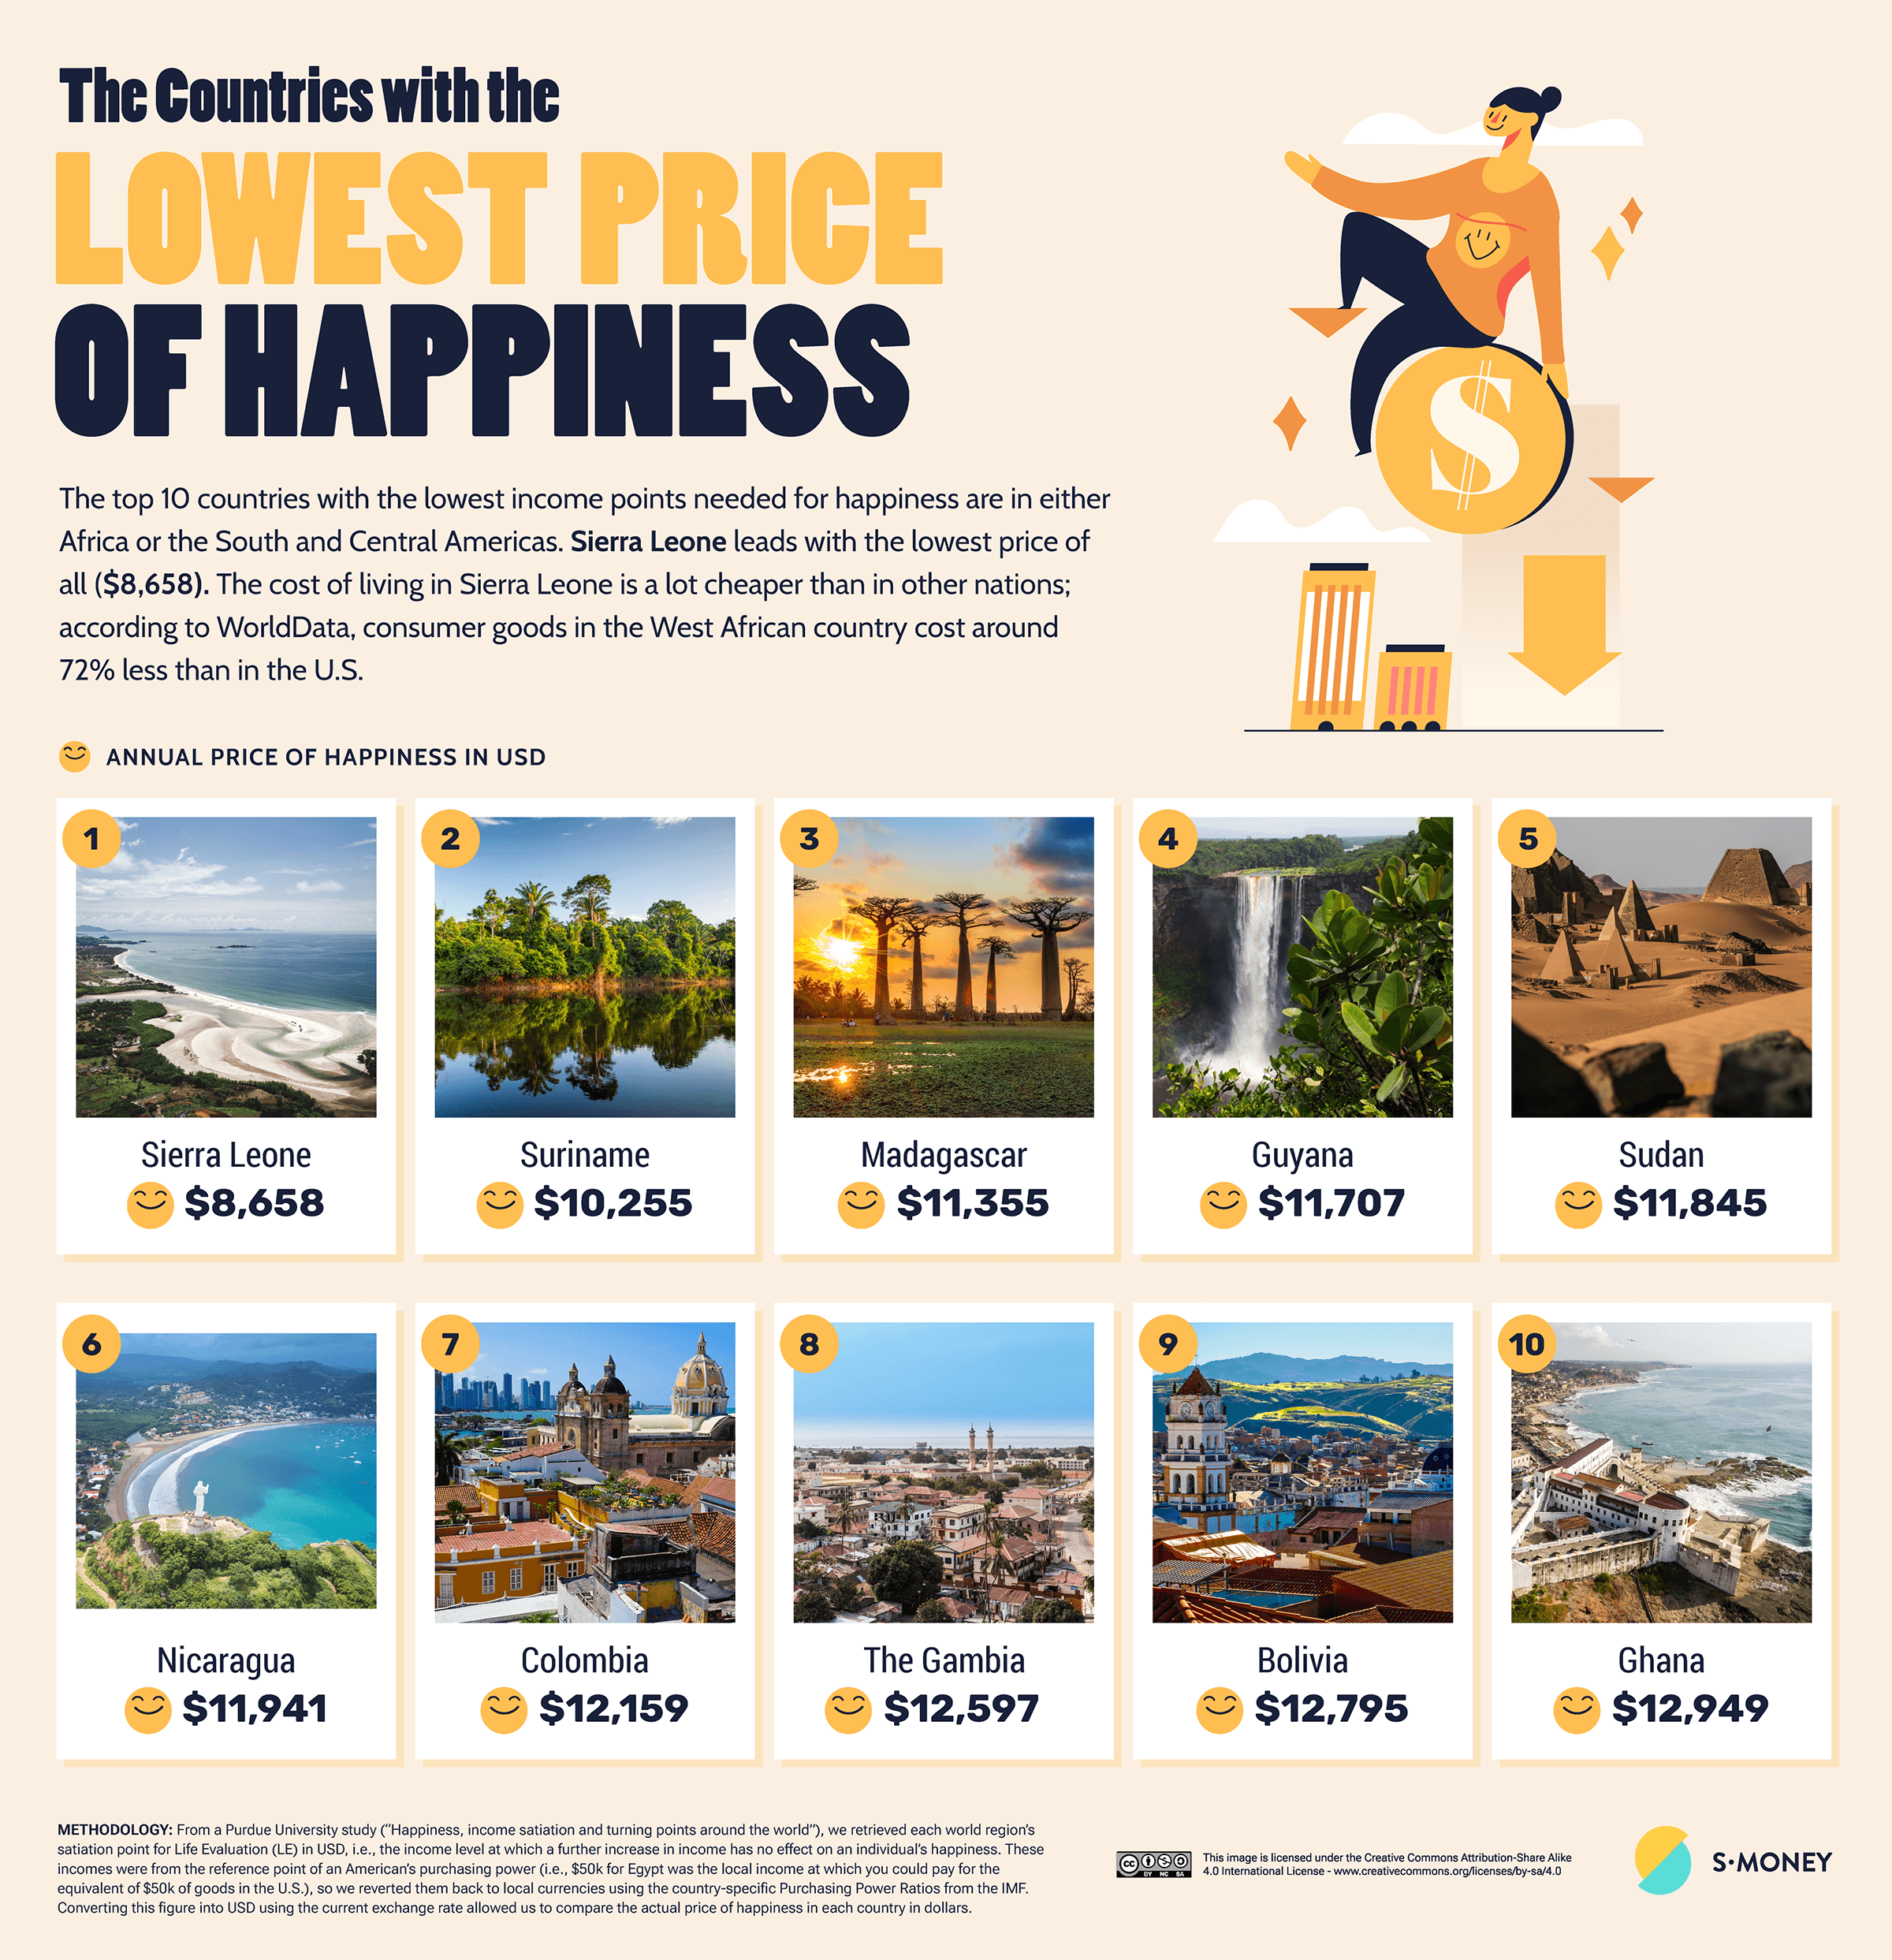 The Countries With the Lowest Price of Happiness